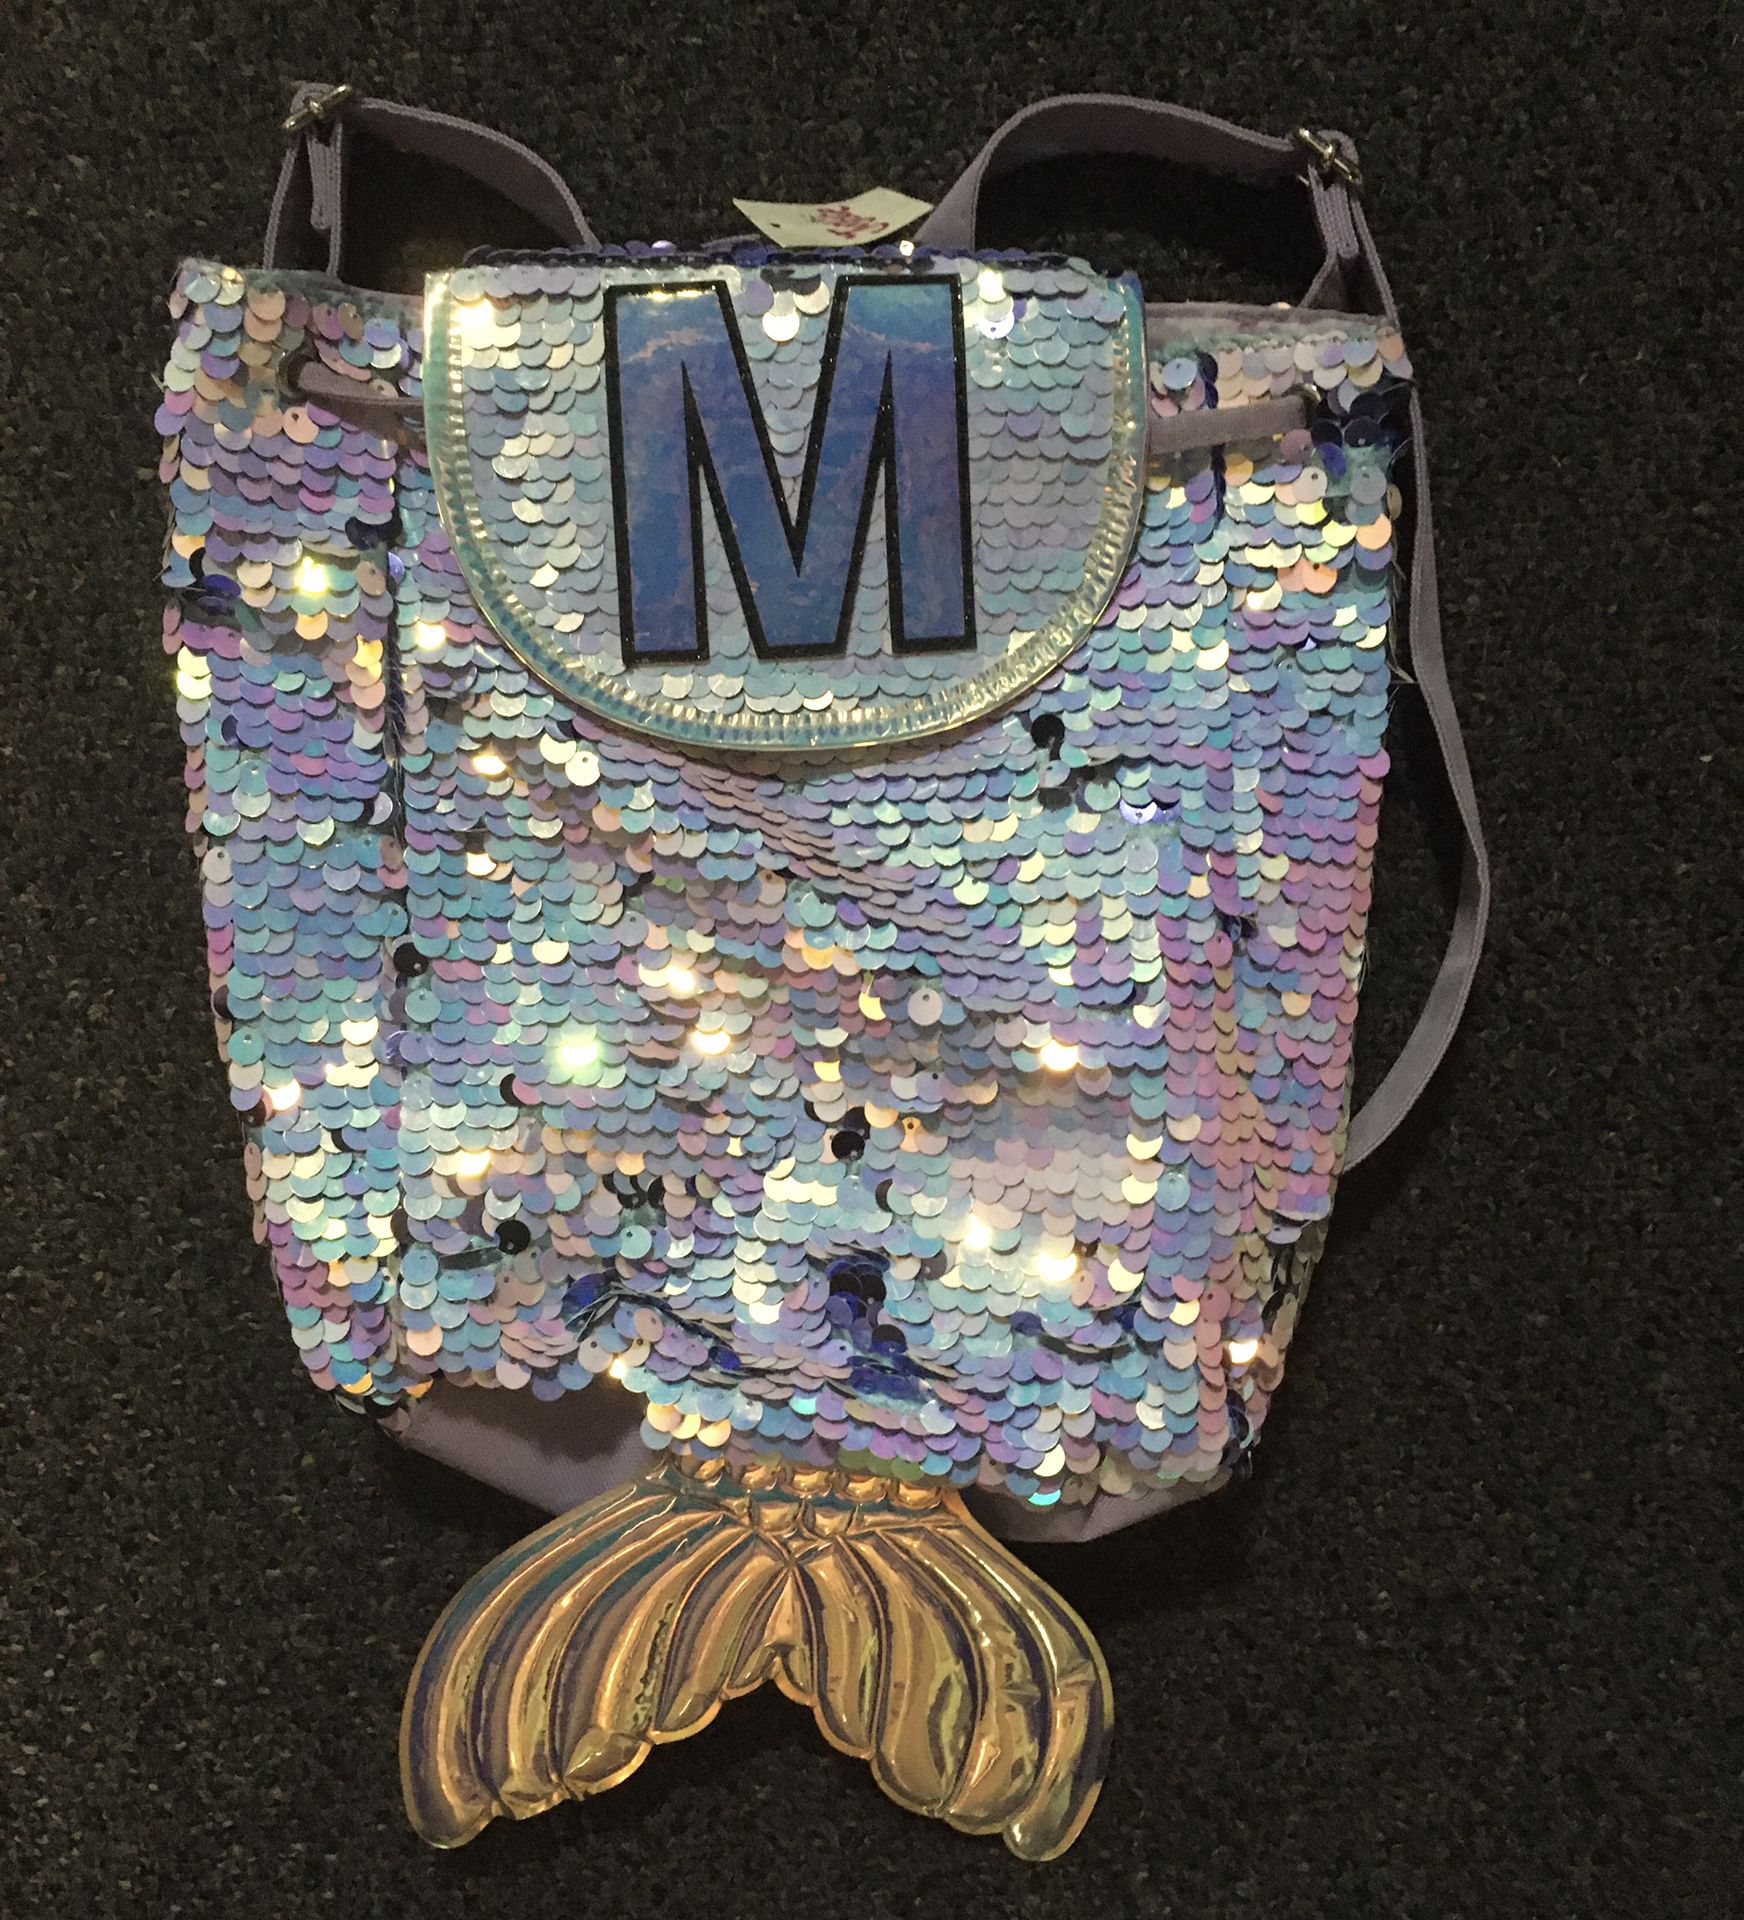 New Justice Sparkly Medium size mermaid tail backpack 